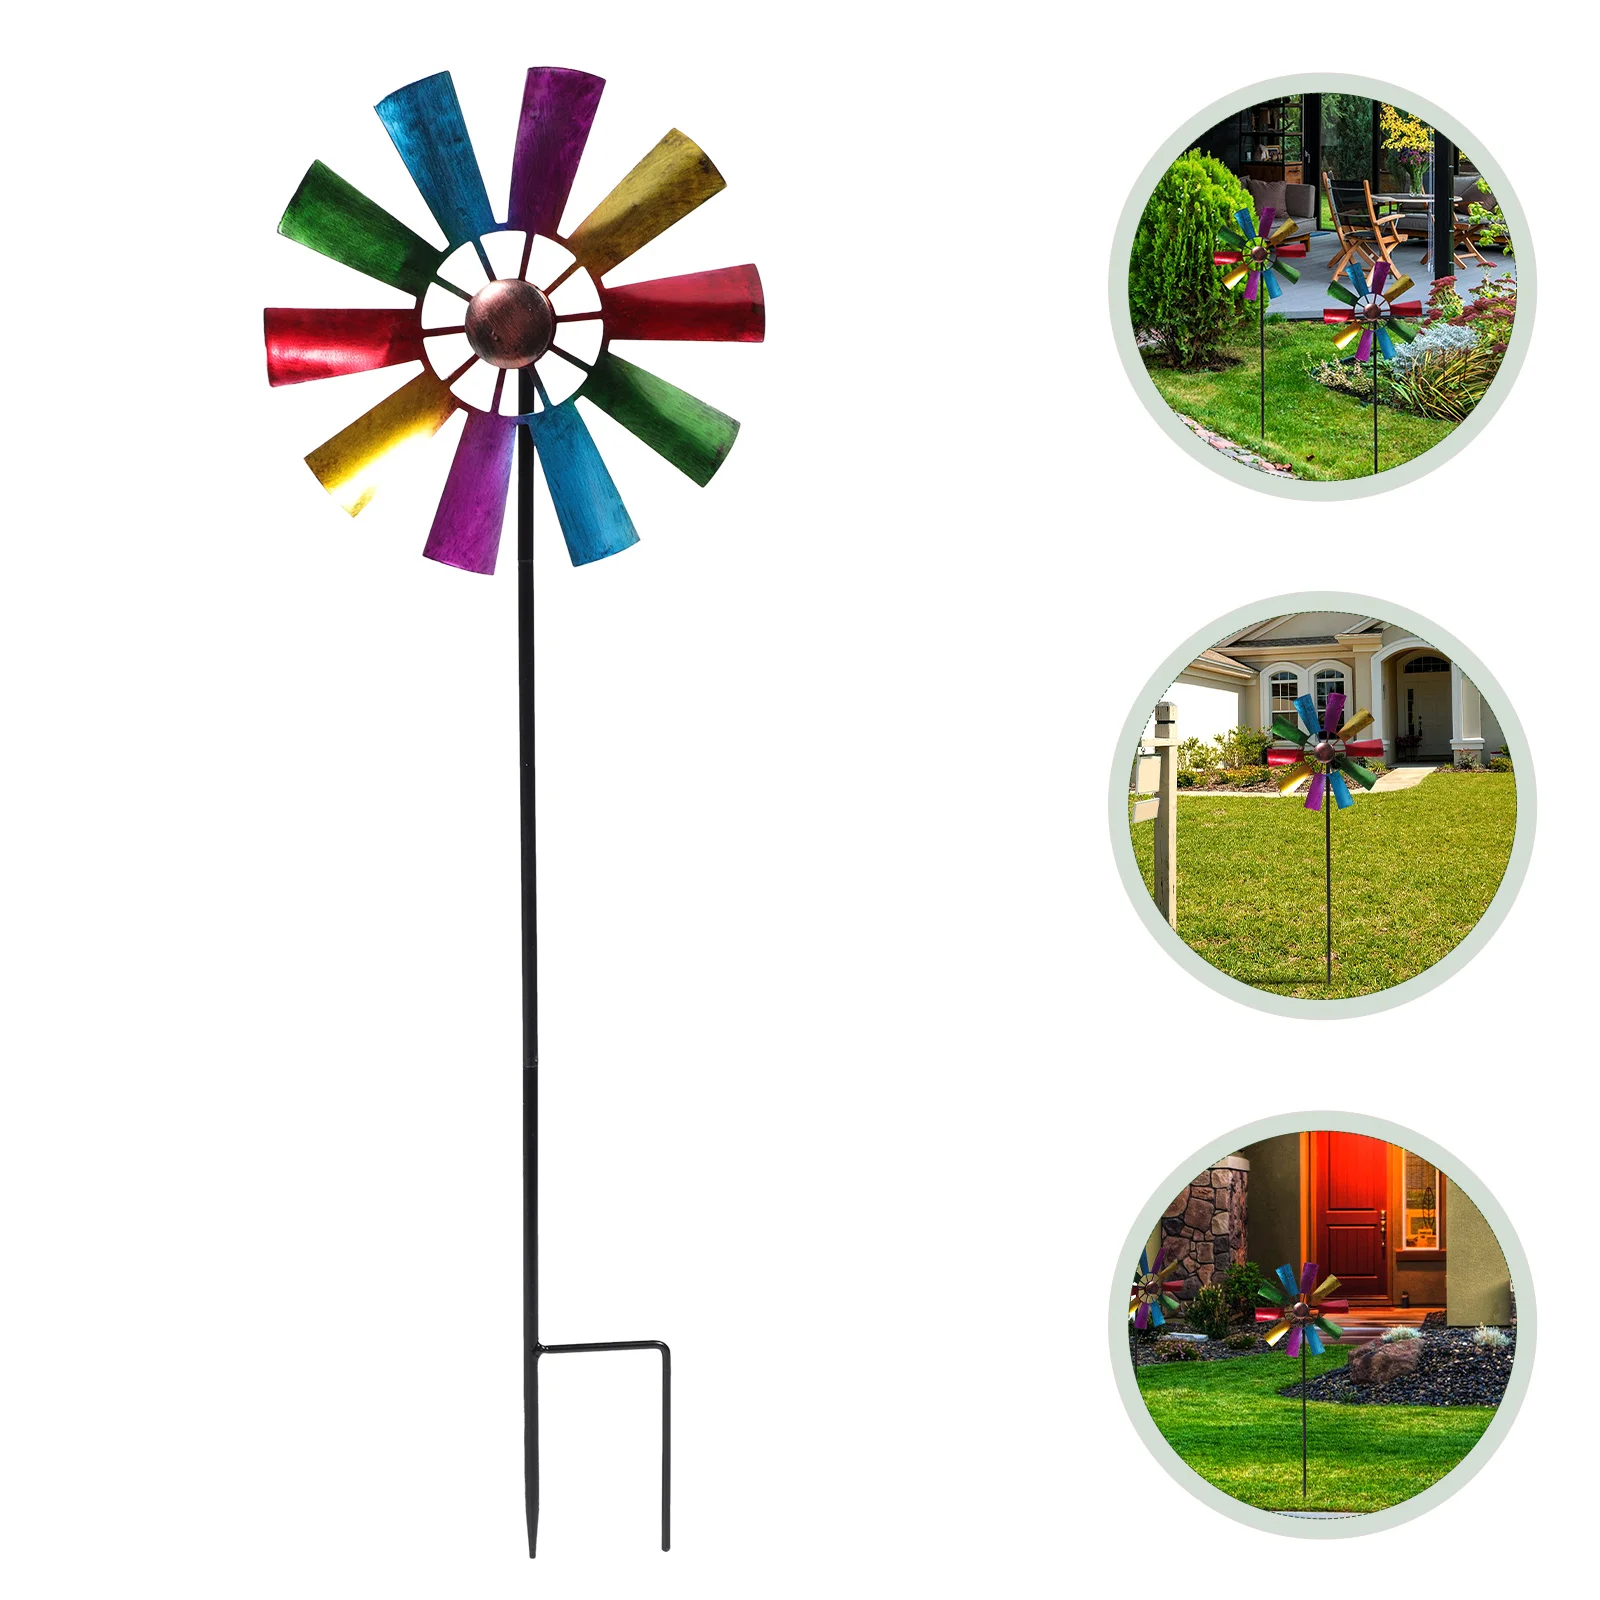 

Metal Wind with Shepherds Hook Windmill Garden Pinwheel Windmill Decoration for Outdoor Garden Lawn Colorful